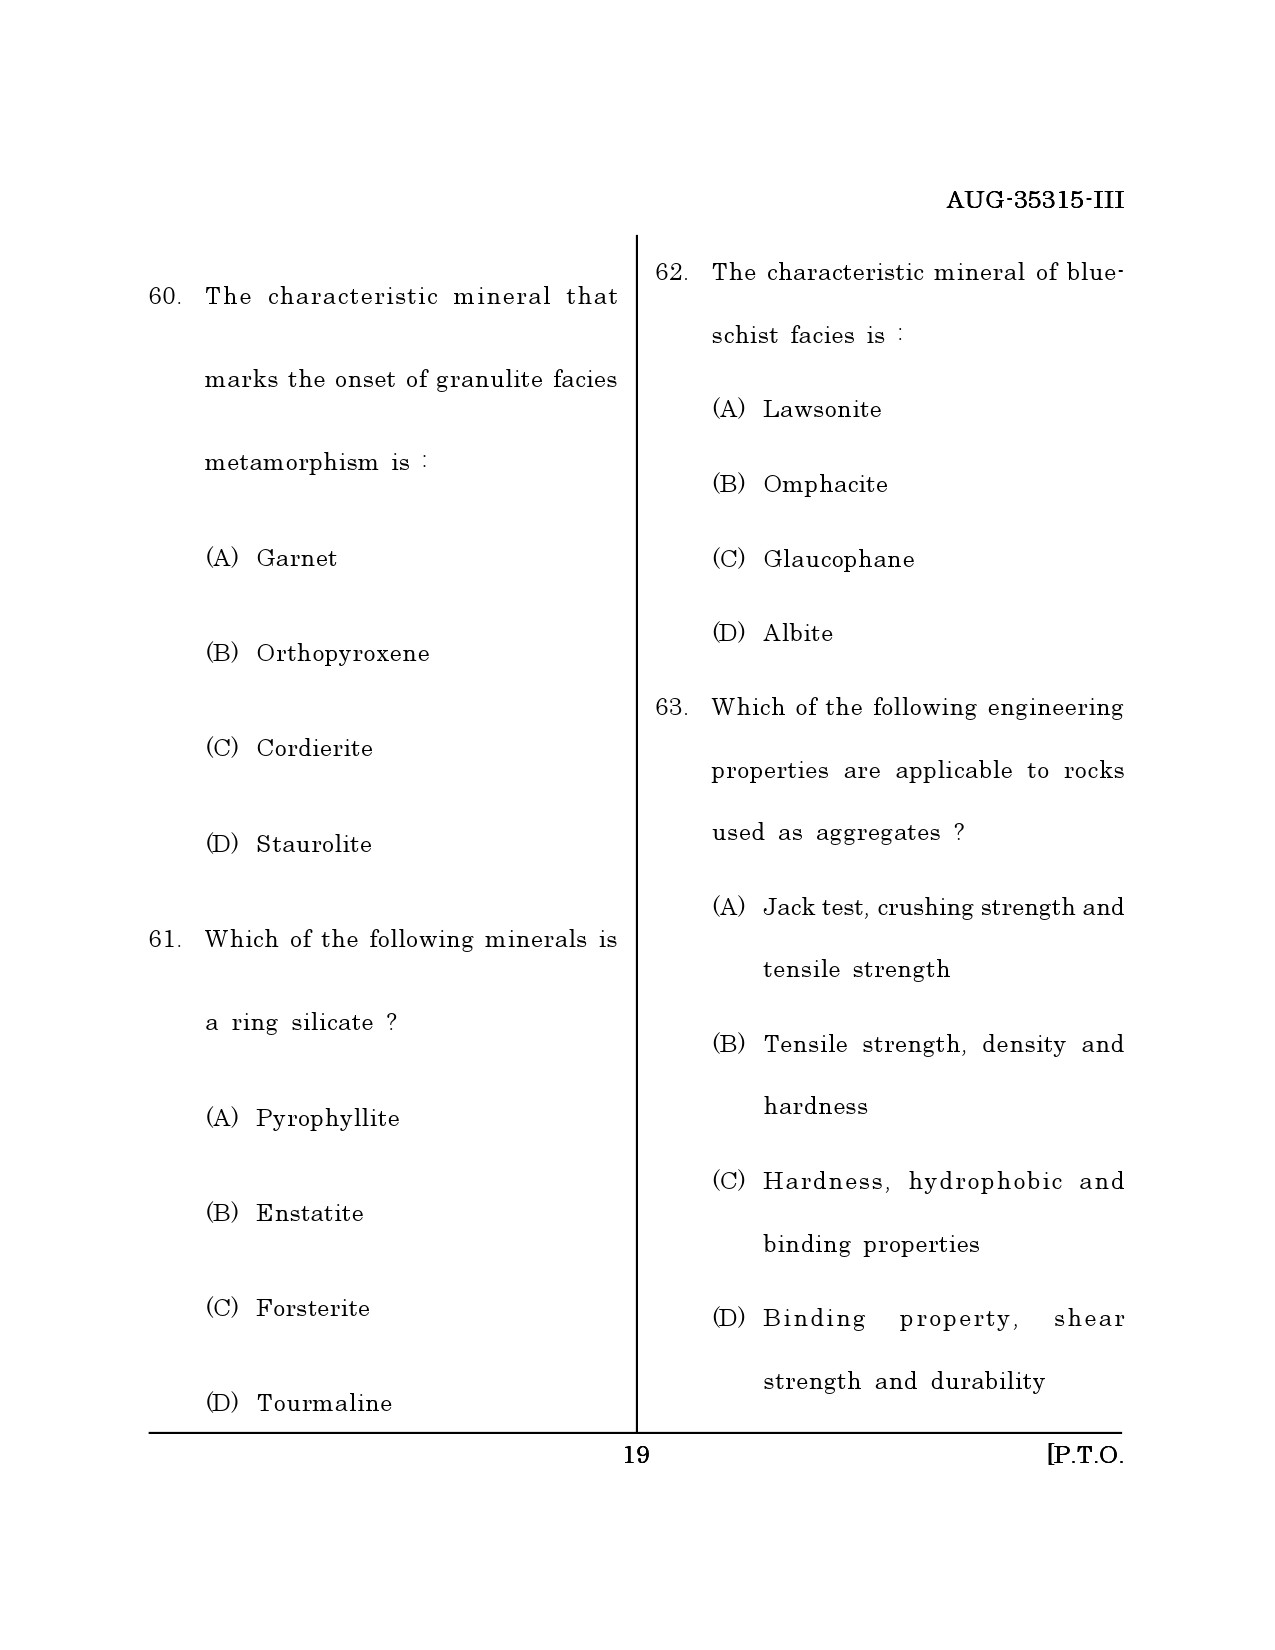 Maharashtra SET Earth Atmospheric Ocean Planetary Science Question Paper III August 2015 18